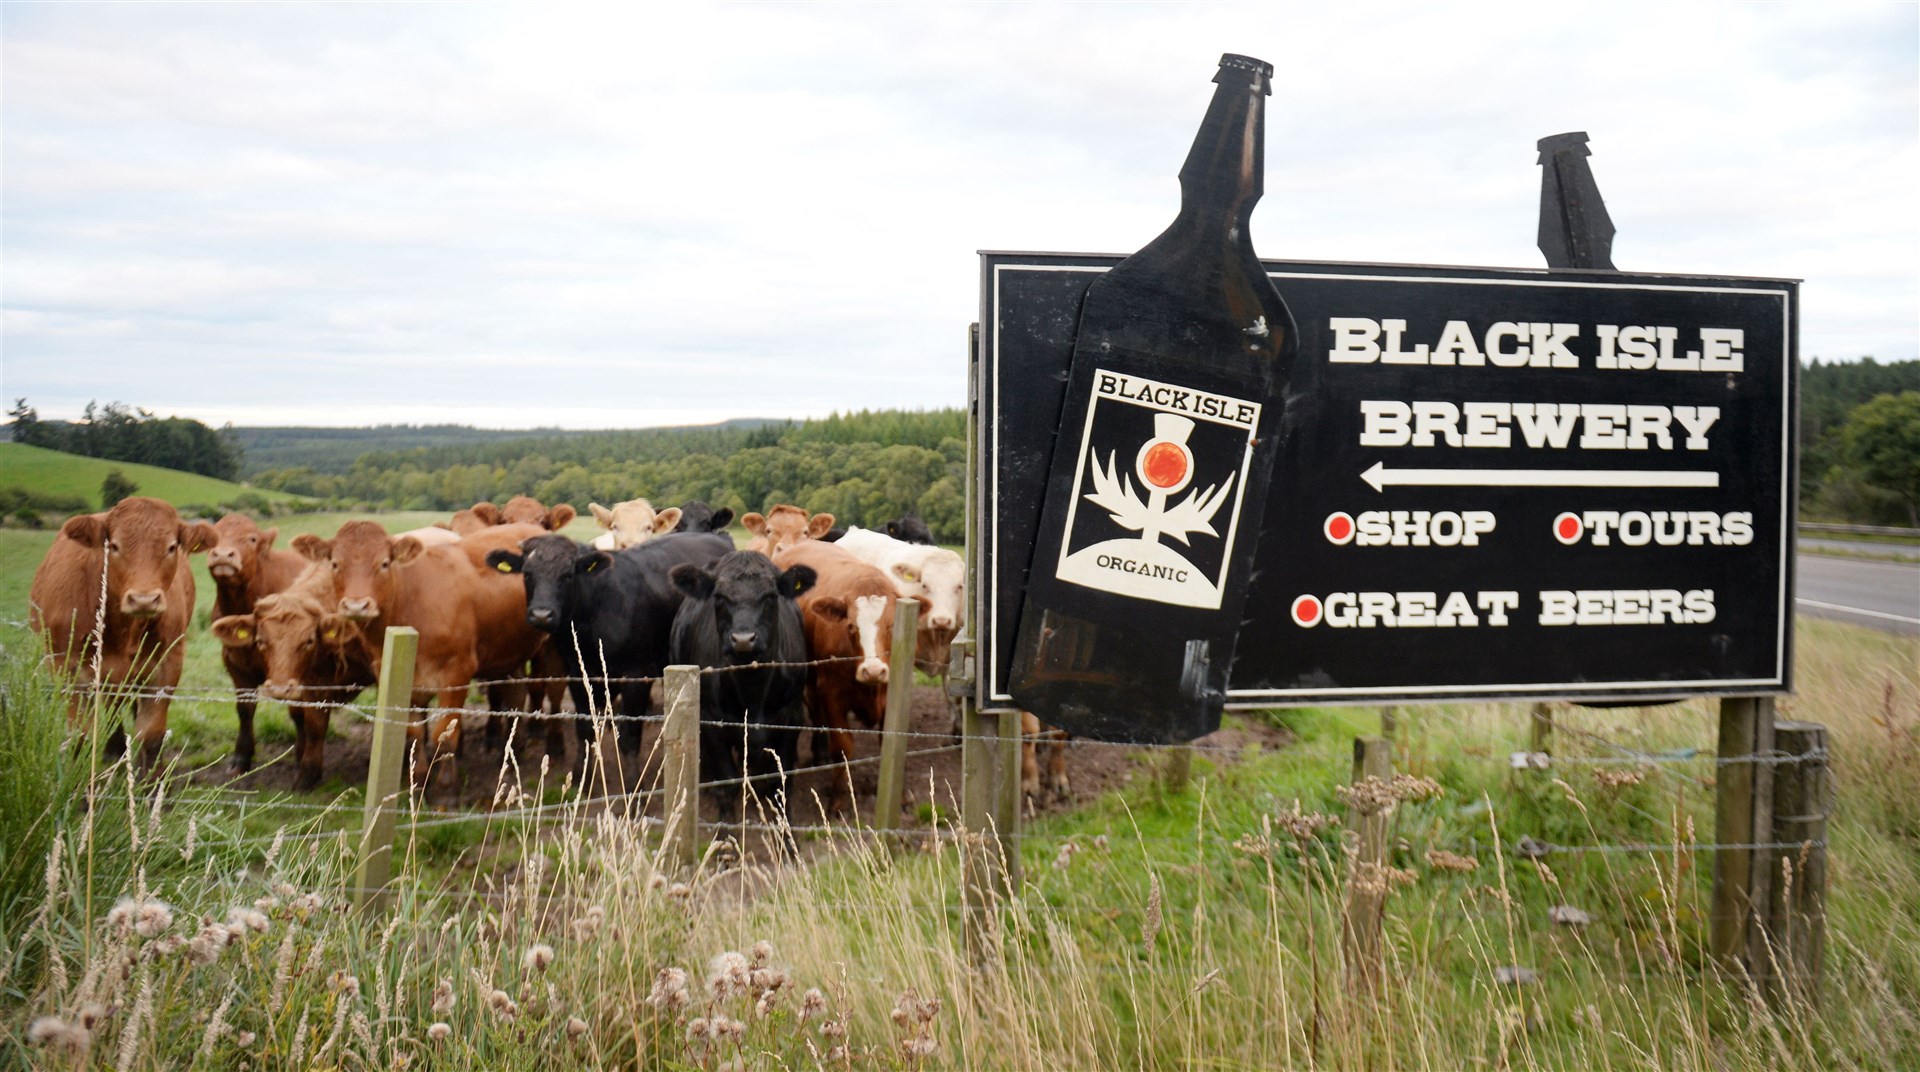 Black Isle Brewery prides itself on its organic credentials.